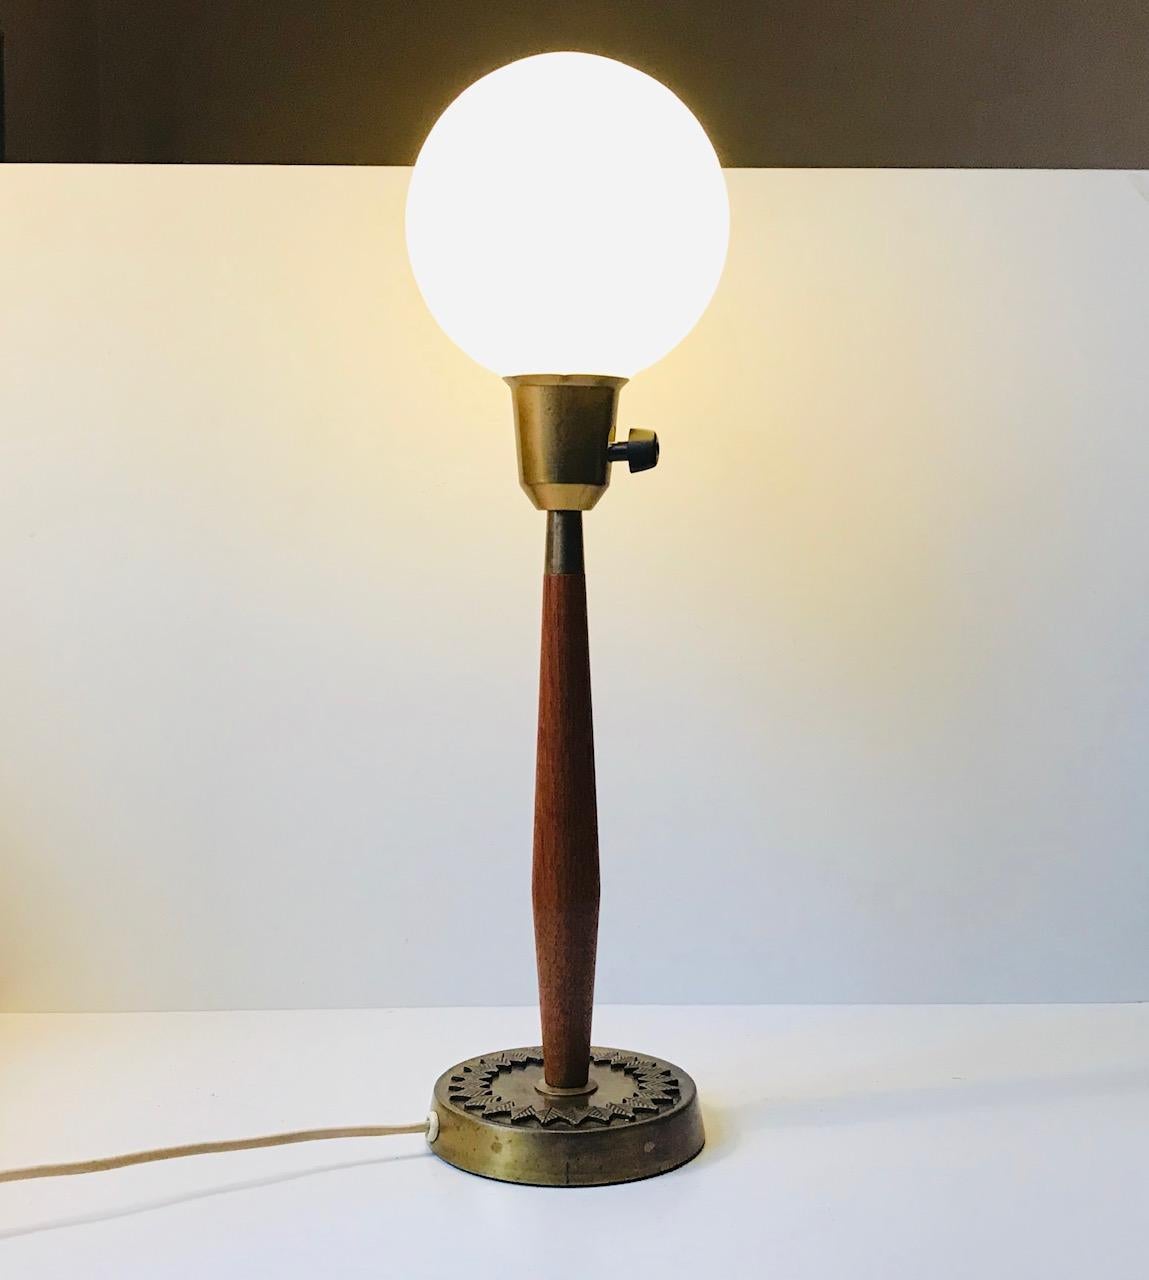 - Scandinavian Modern table light designed by Hans Bergström
- Manufactured by ASEA in Sweden during the early 1950s
- Teak stem with brass socket and brass base with leaf decor in bronze
- Its mounted with a loosely fitted opaline glass